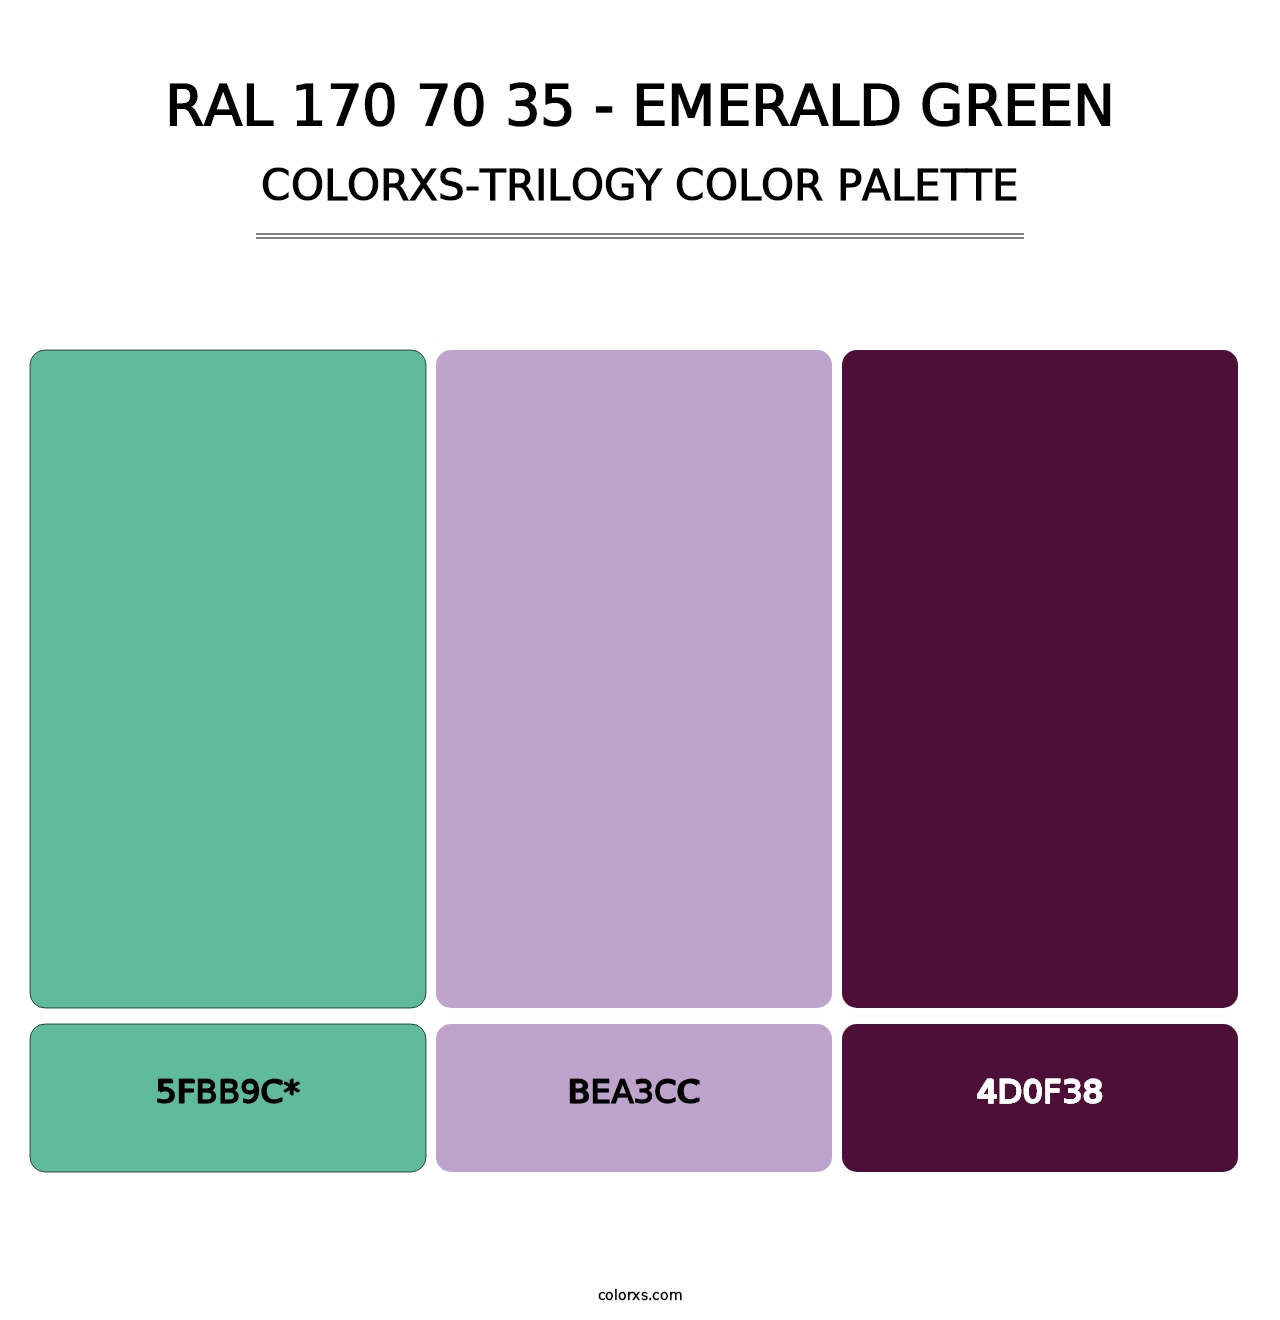 RAL 170 70 35 - Emerald Green - Colorxs Trilogy Palette